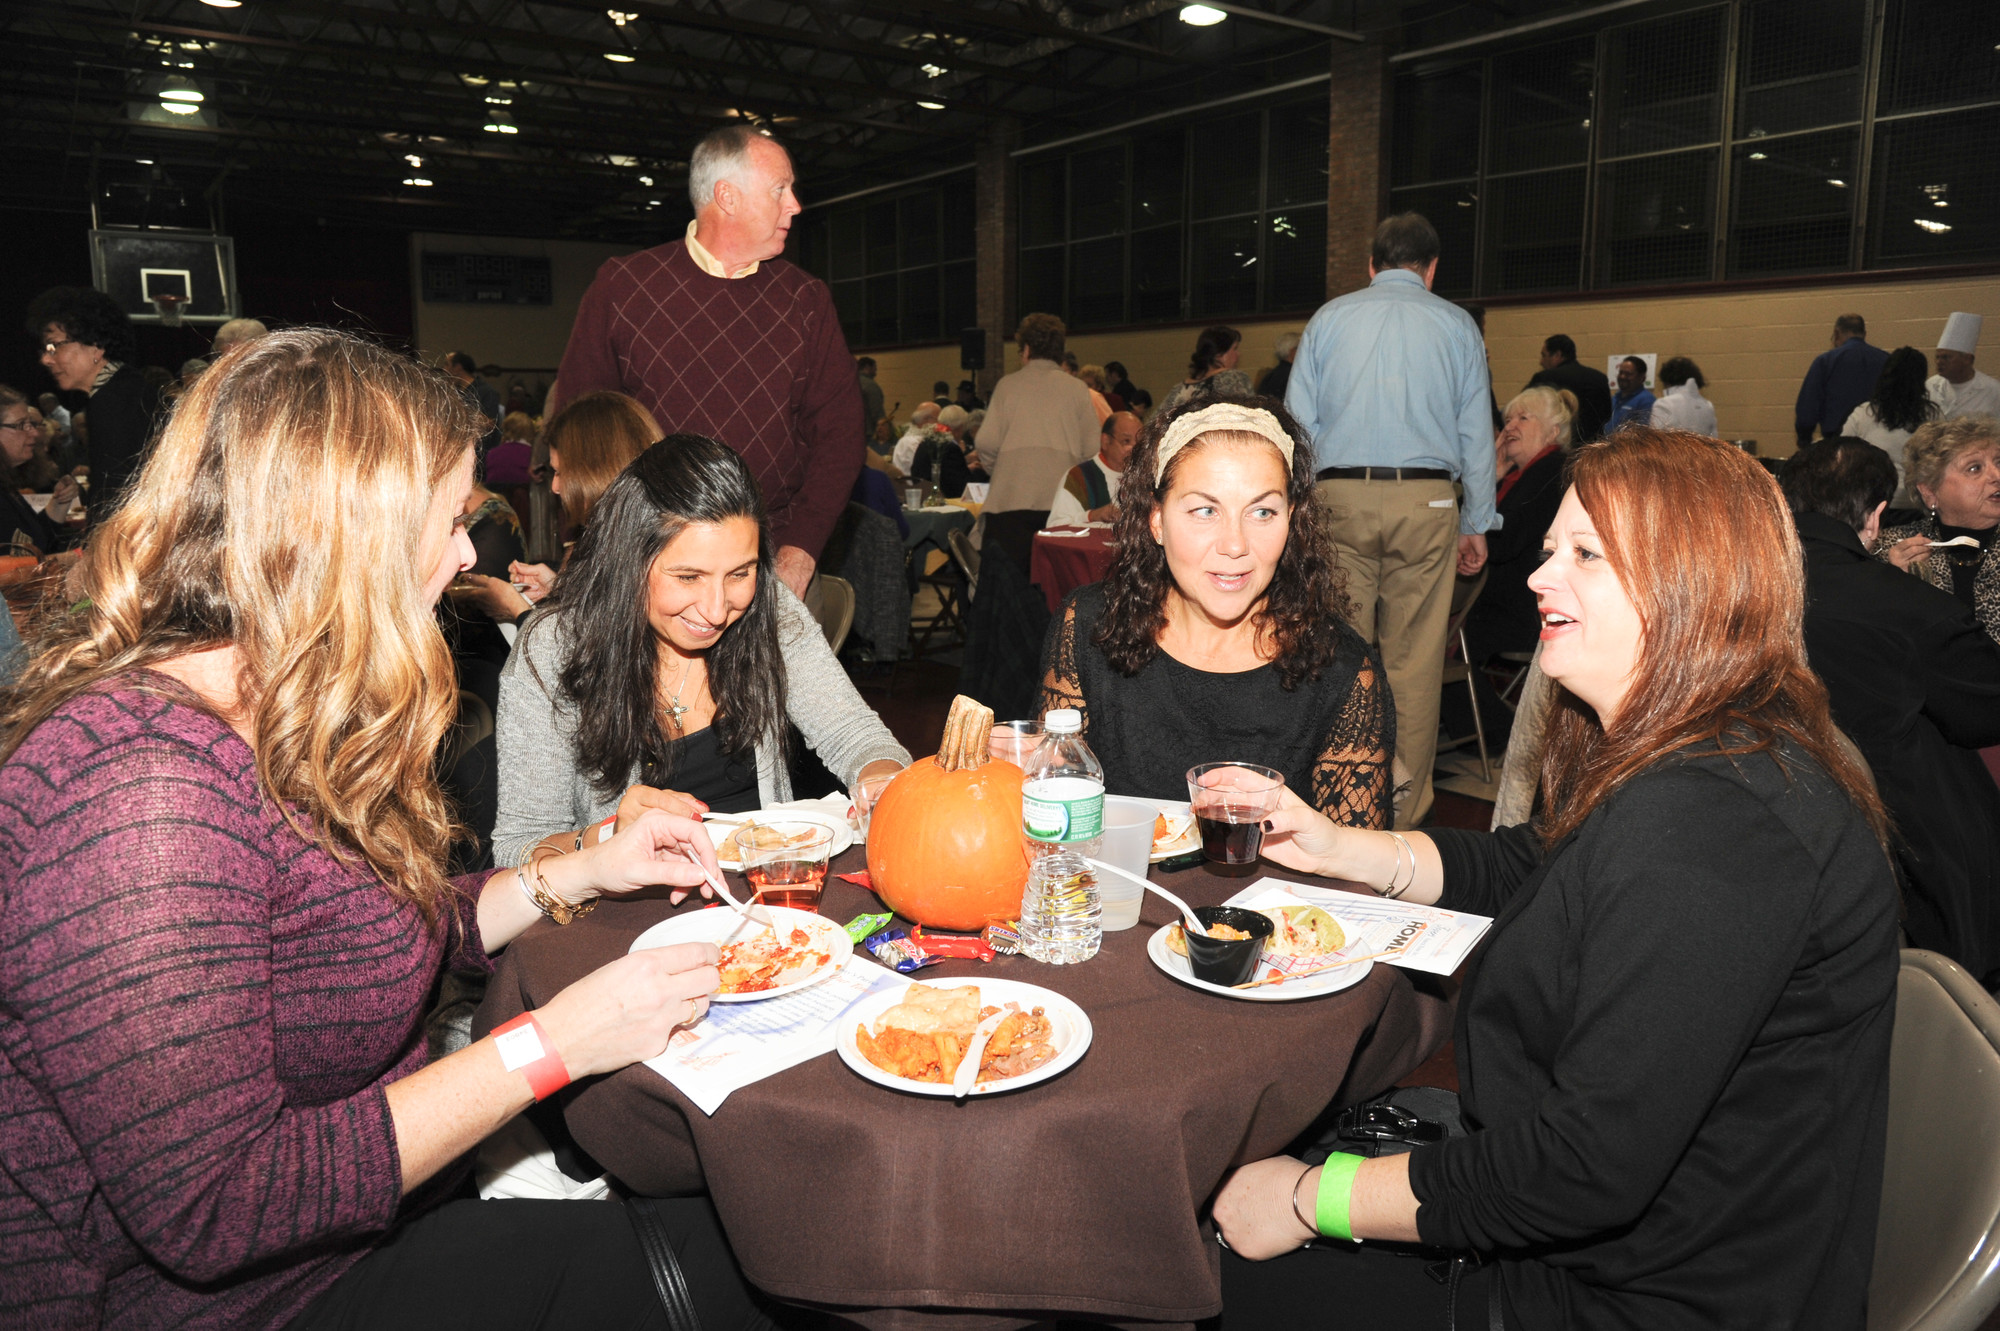 As the name suggests, the “Taste of Our Town” event at St. Anthony’s offered plenty in the way of good food. Tricia Daly, Dawn Matarese, Jennifer Carrano and Lori Gilbert took advantage.